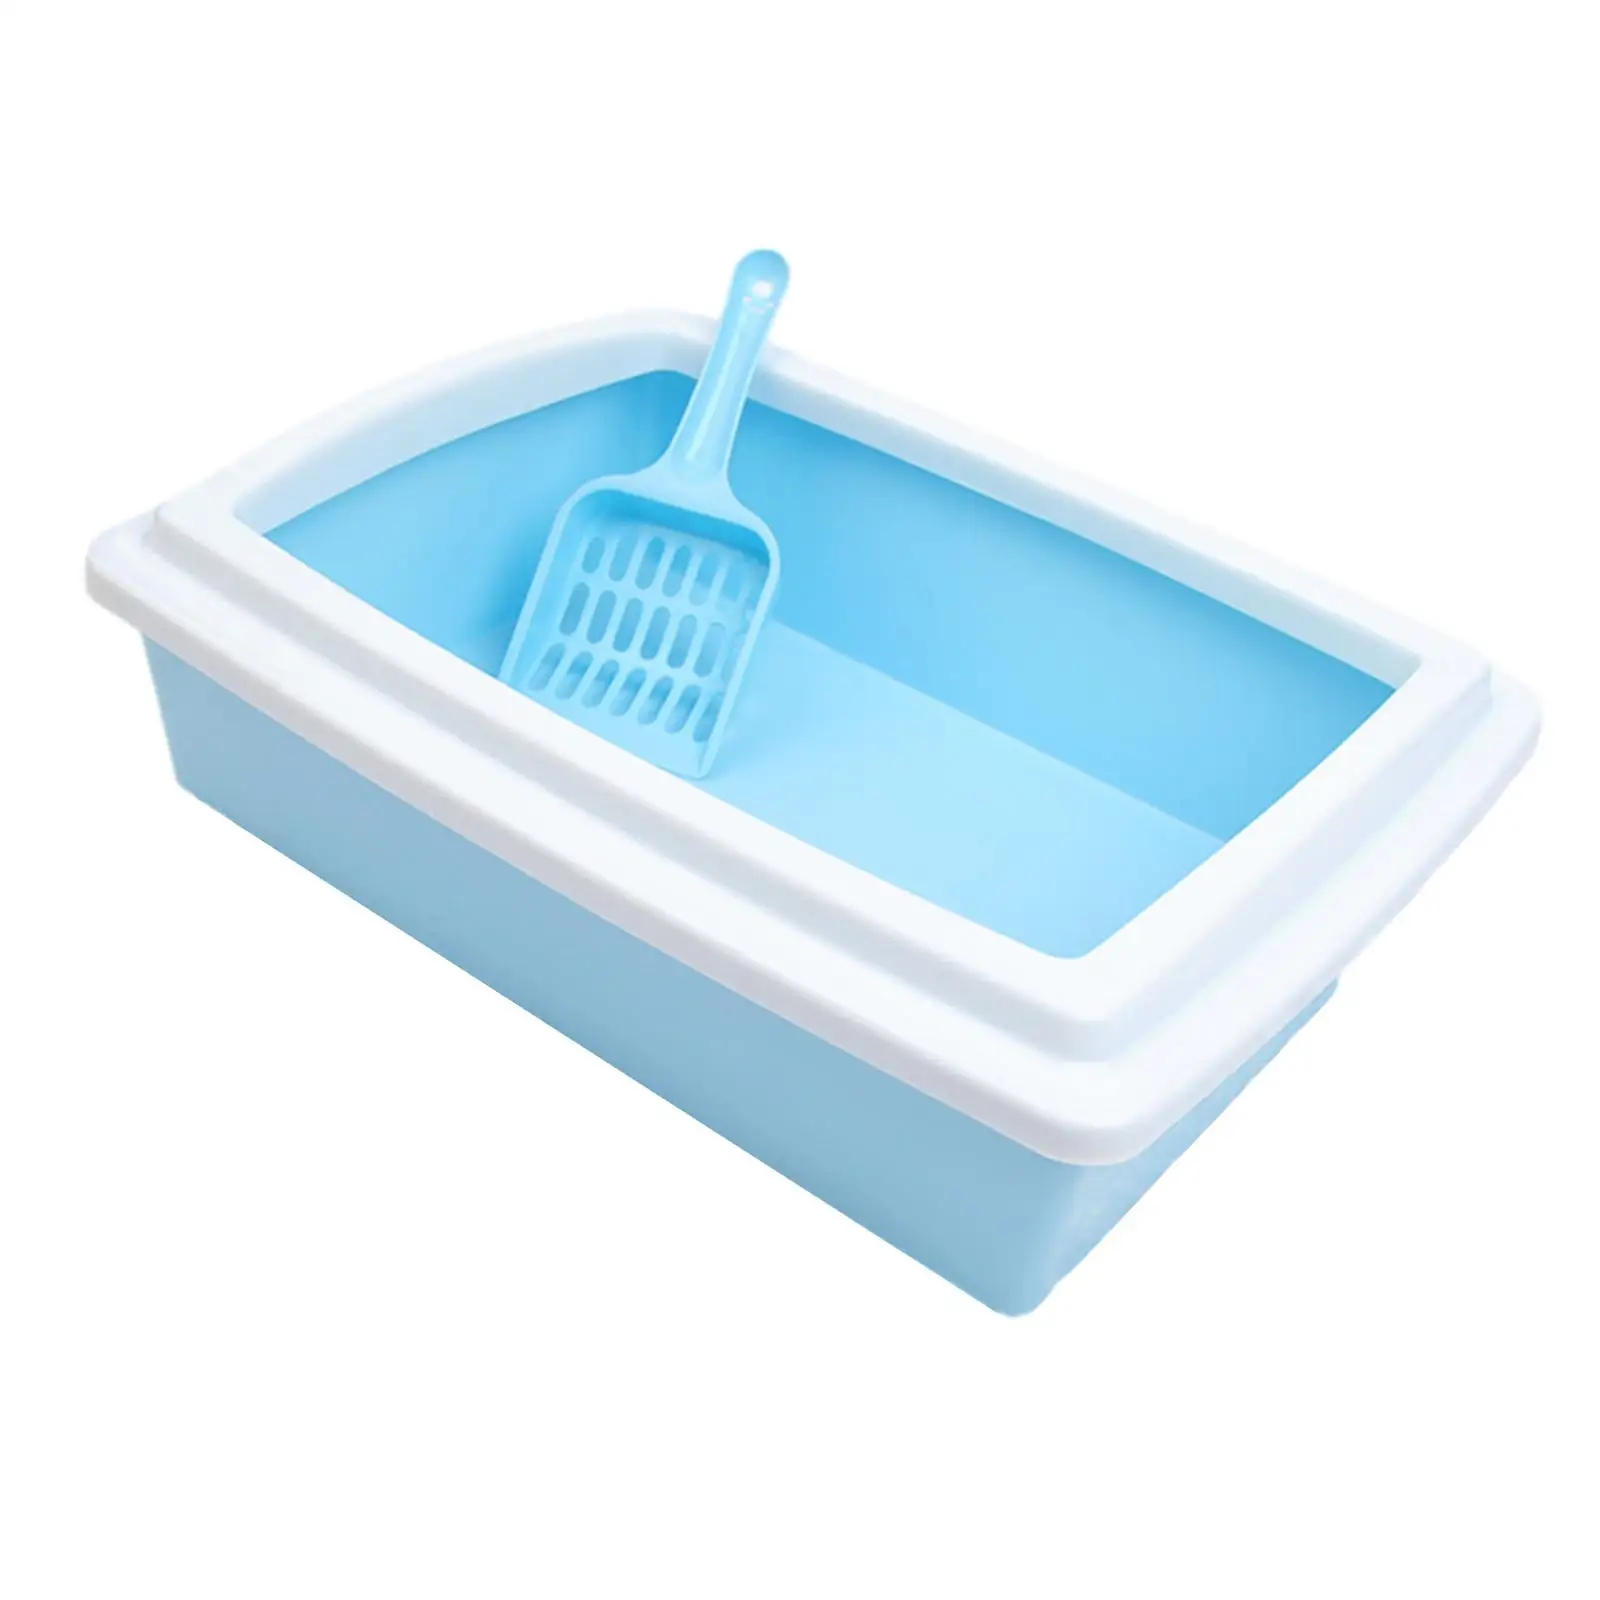 Cat Litter Box Easy to Clean Sturdy Portable Splashproof for All Kinds of Cat Litter Cat Potty with High Side Kitten Toilet